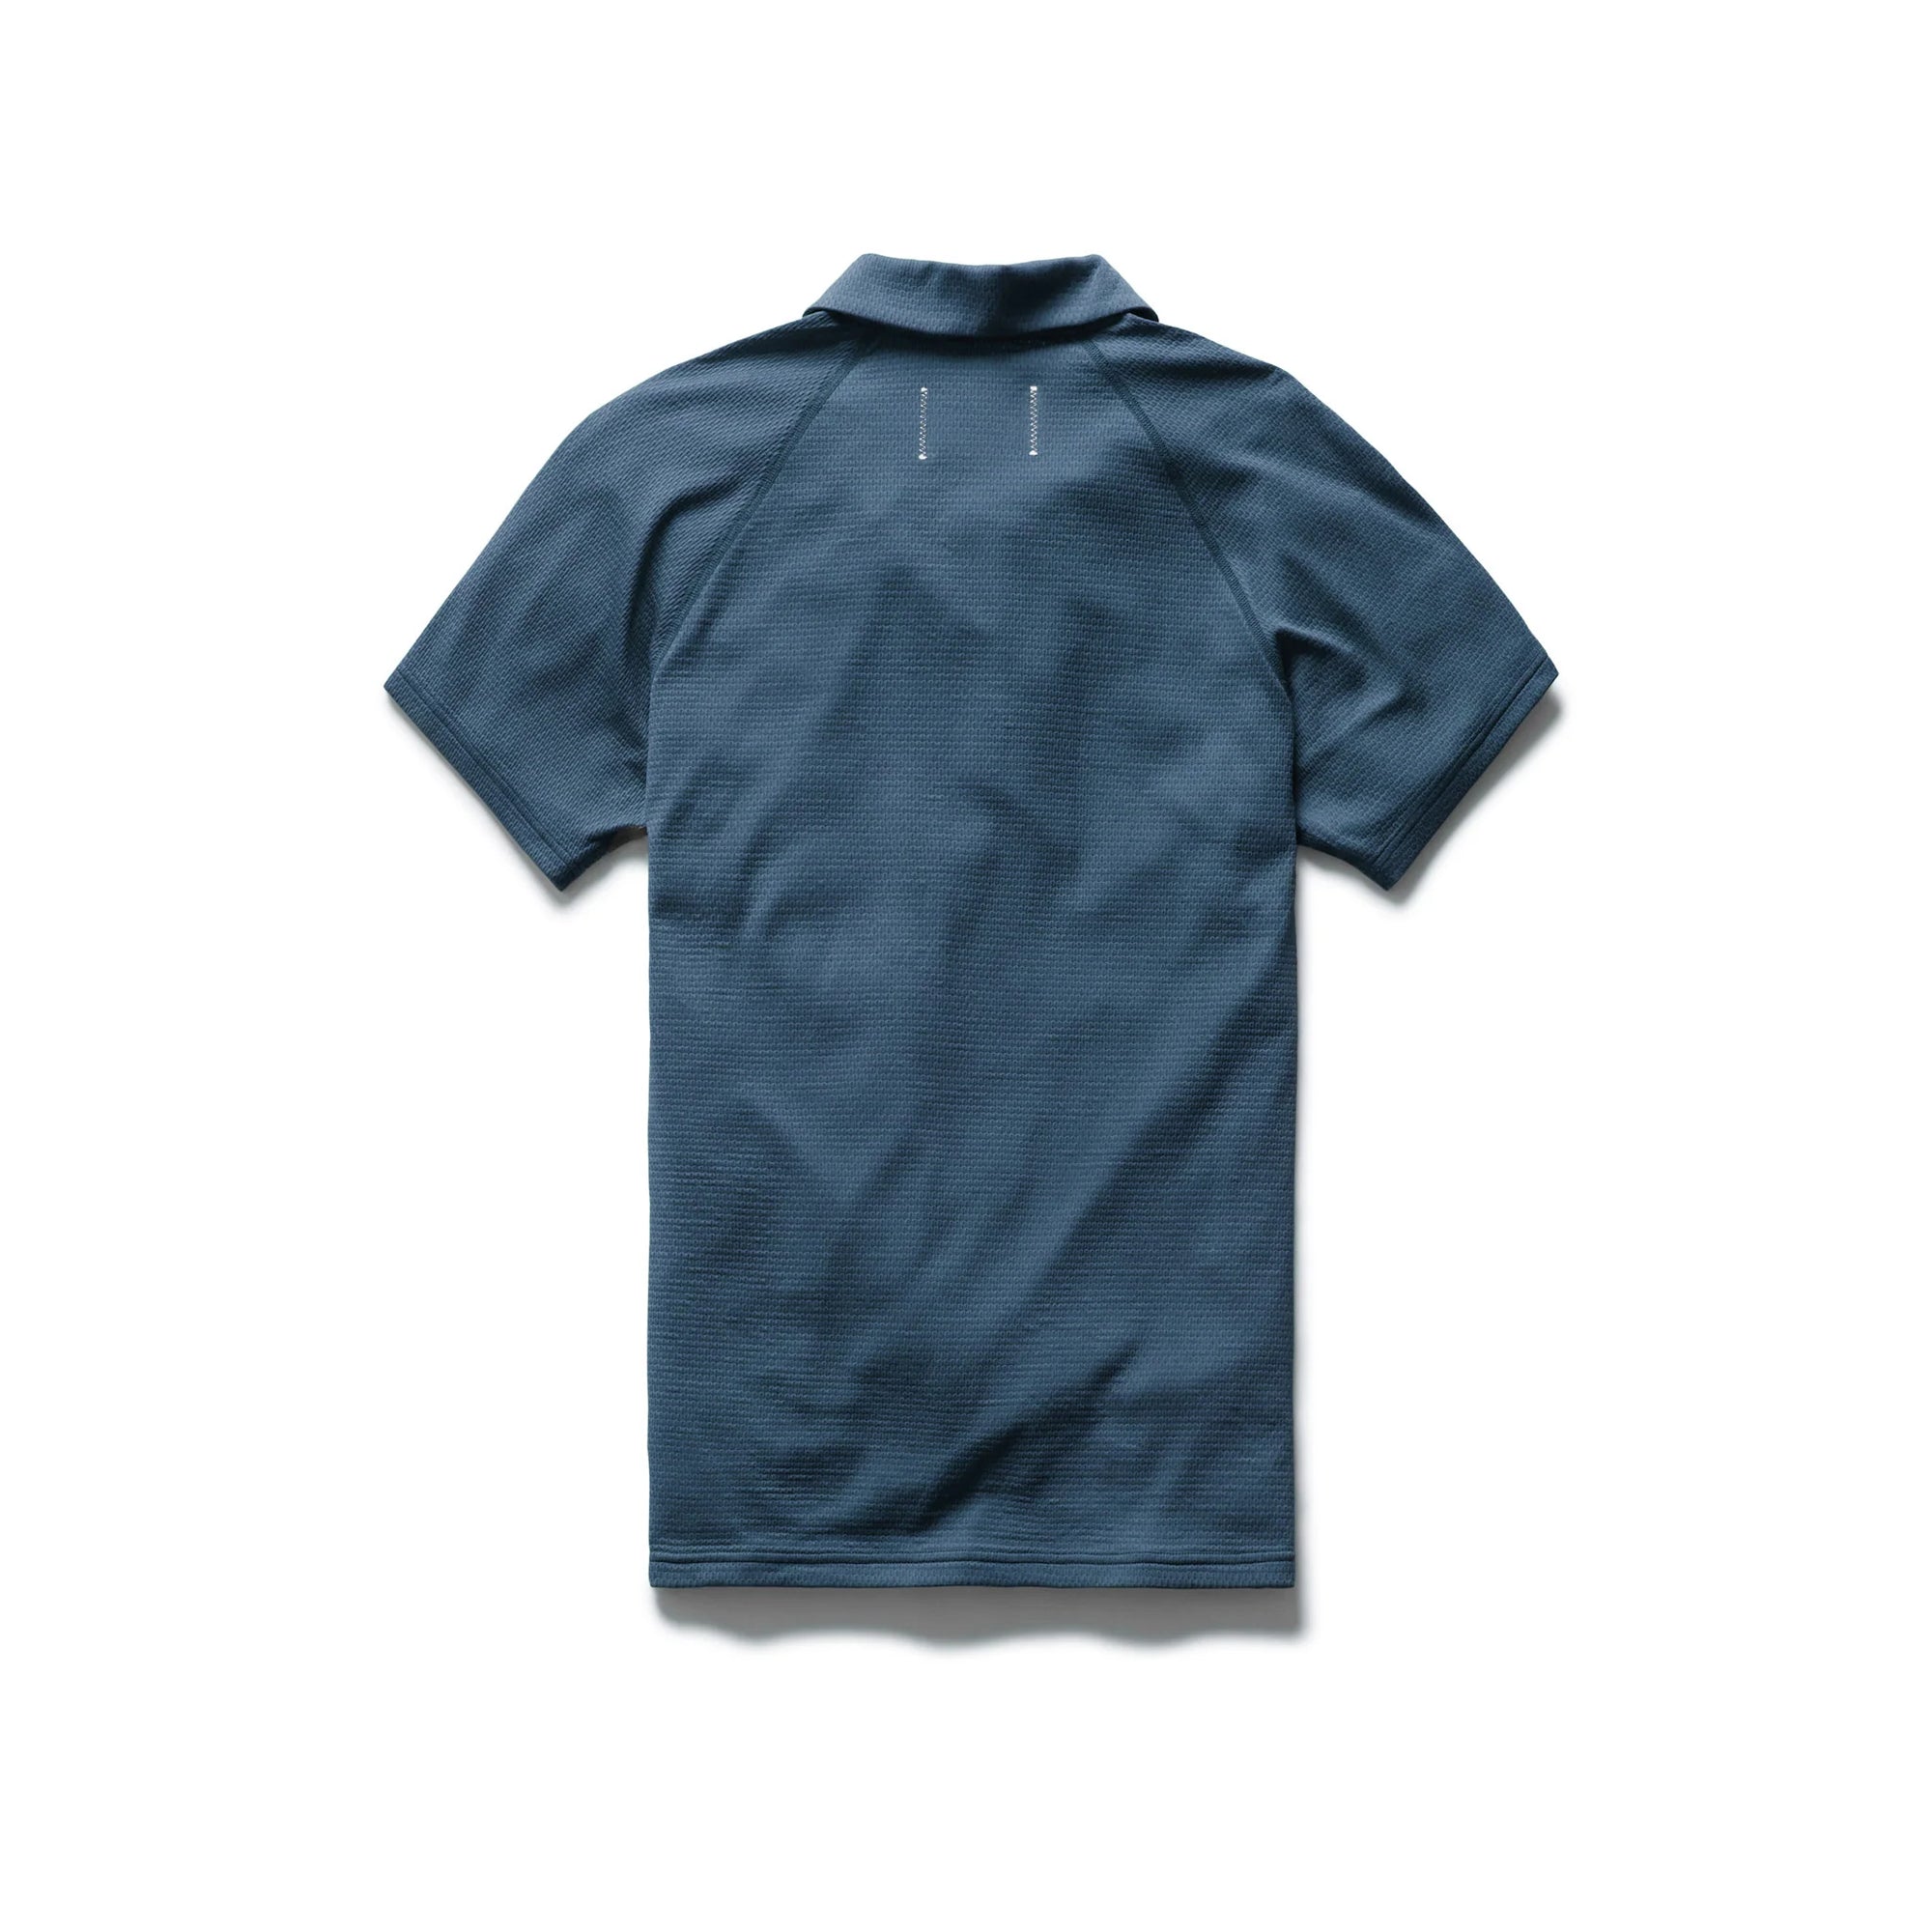 Reigning Champ Solotex Mesh Polo in Washed Blue